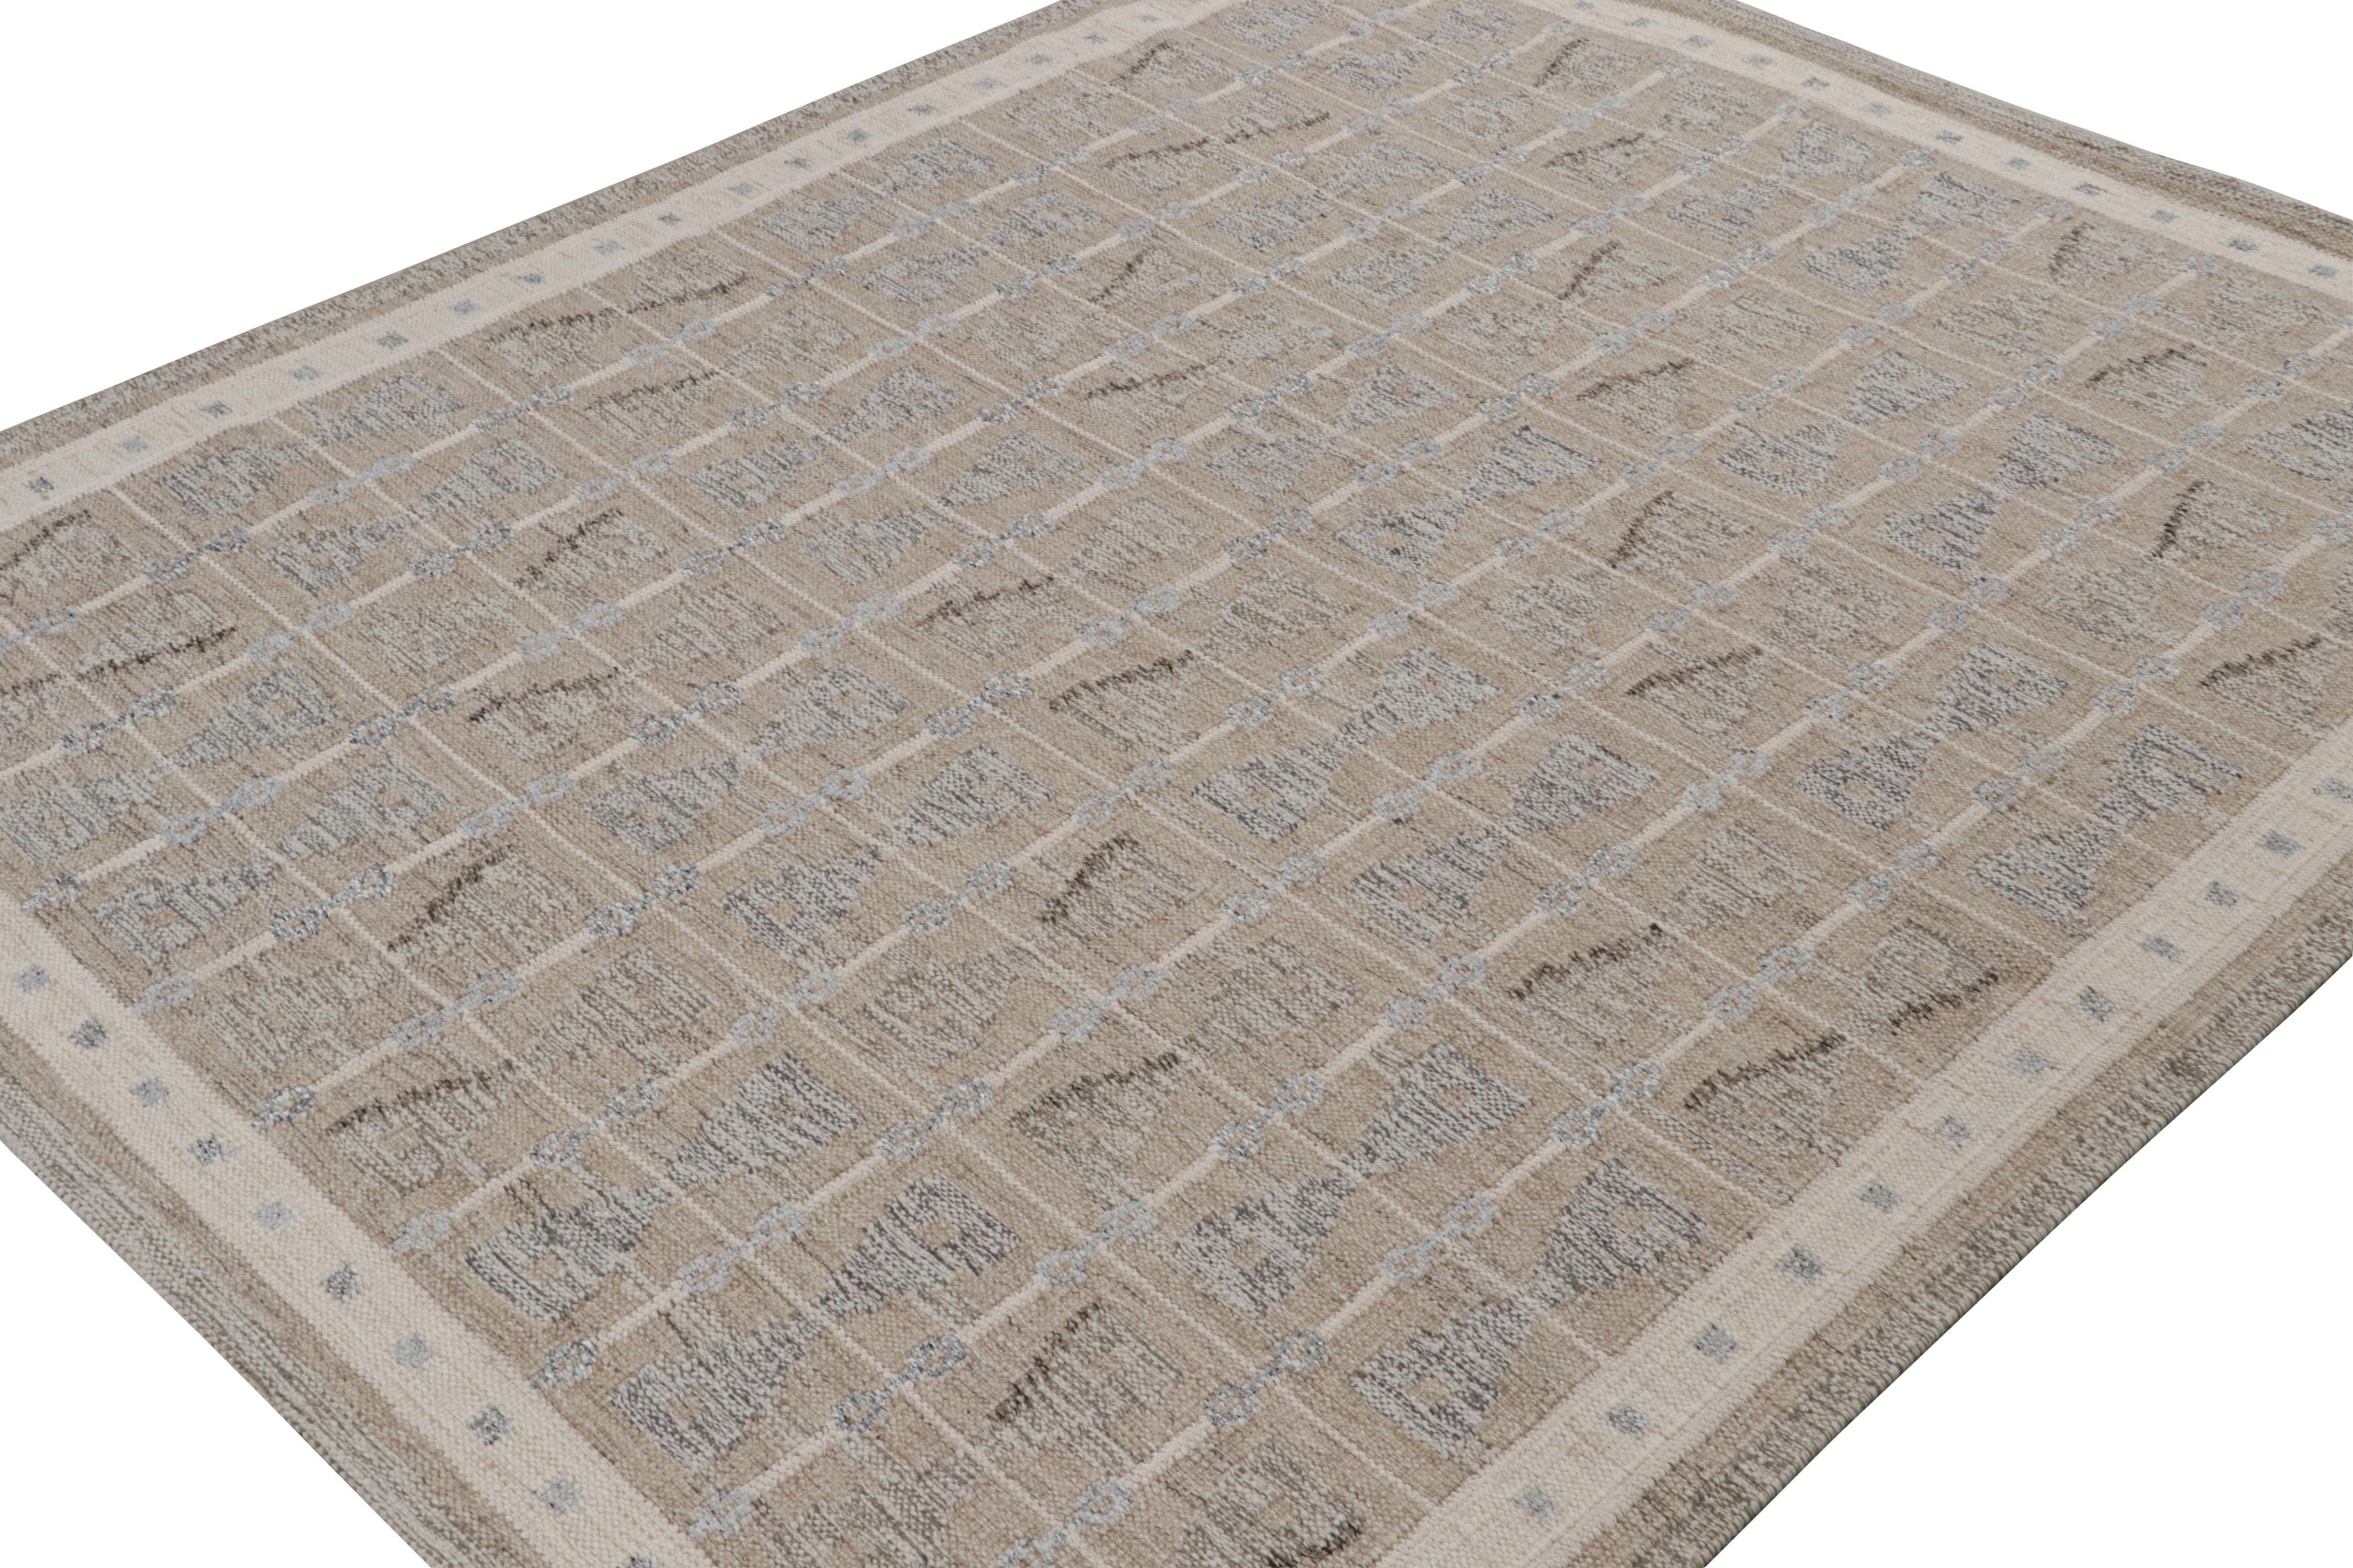 A smart 8x10 Swedish style kilim from our award-winning Scandinavian flat weave collection. Handwoven in wool & undyed natural yarns.

On the Design: 

This rug enjoys geometric patterns in gray & beige with white accents. Keen eyes will admire